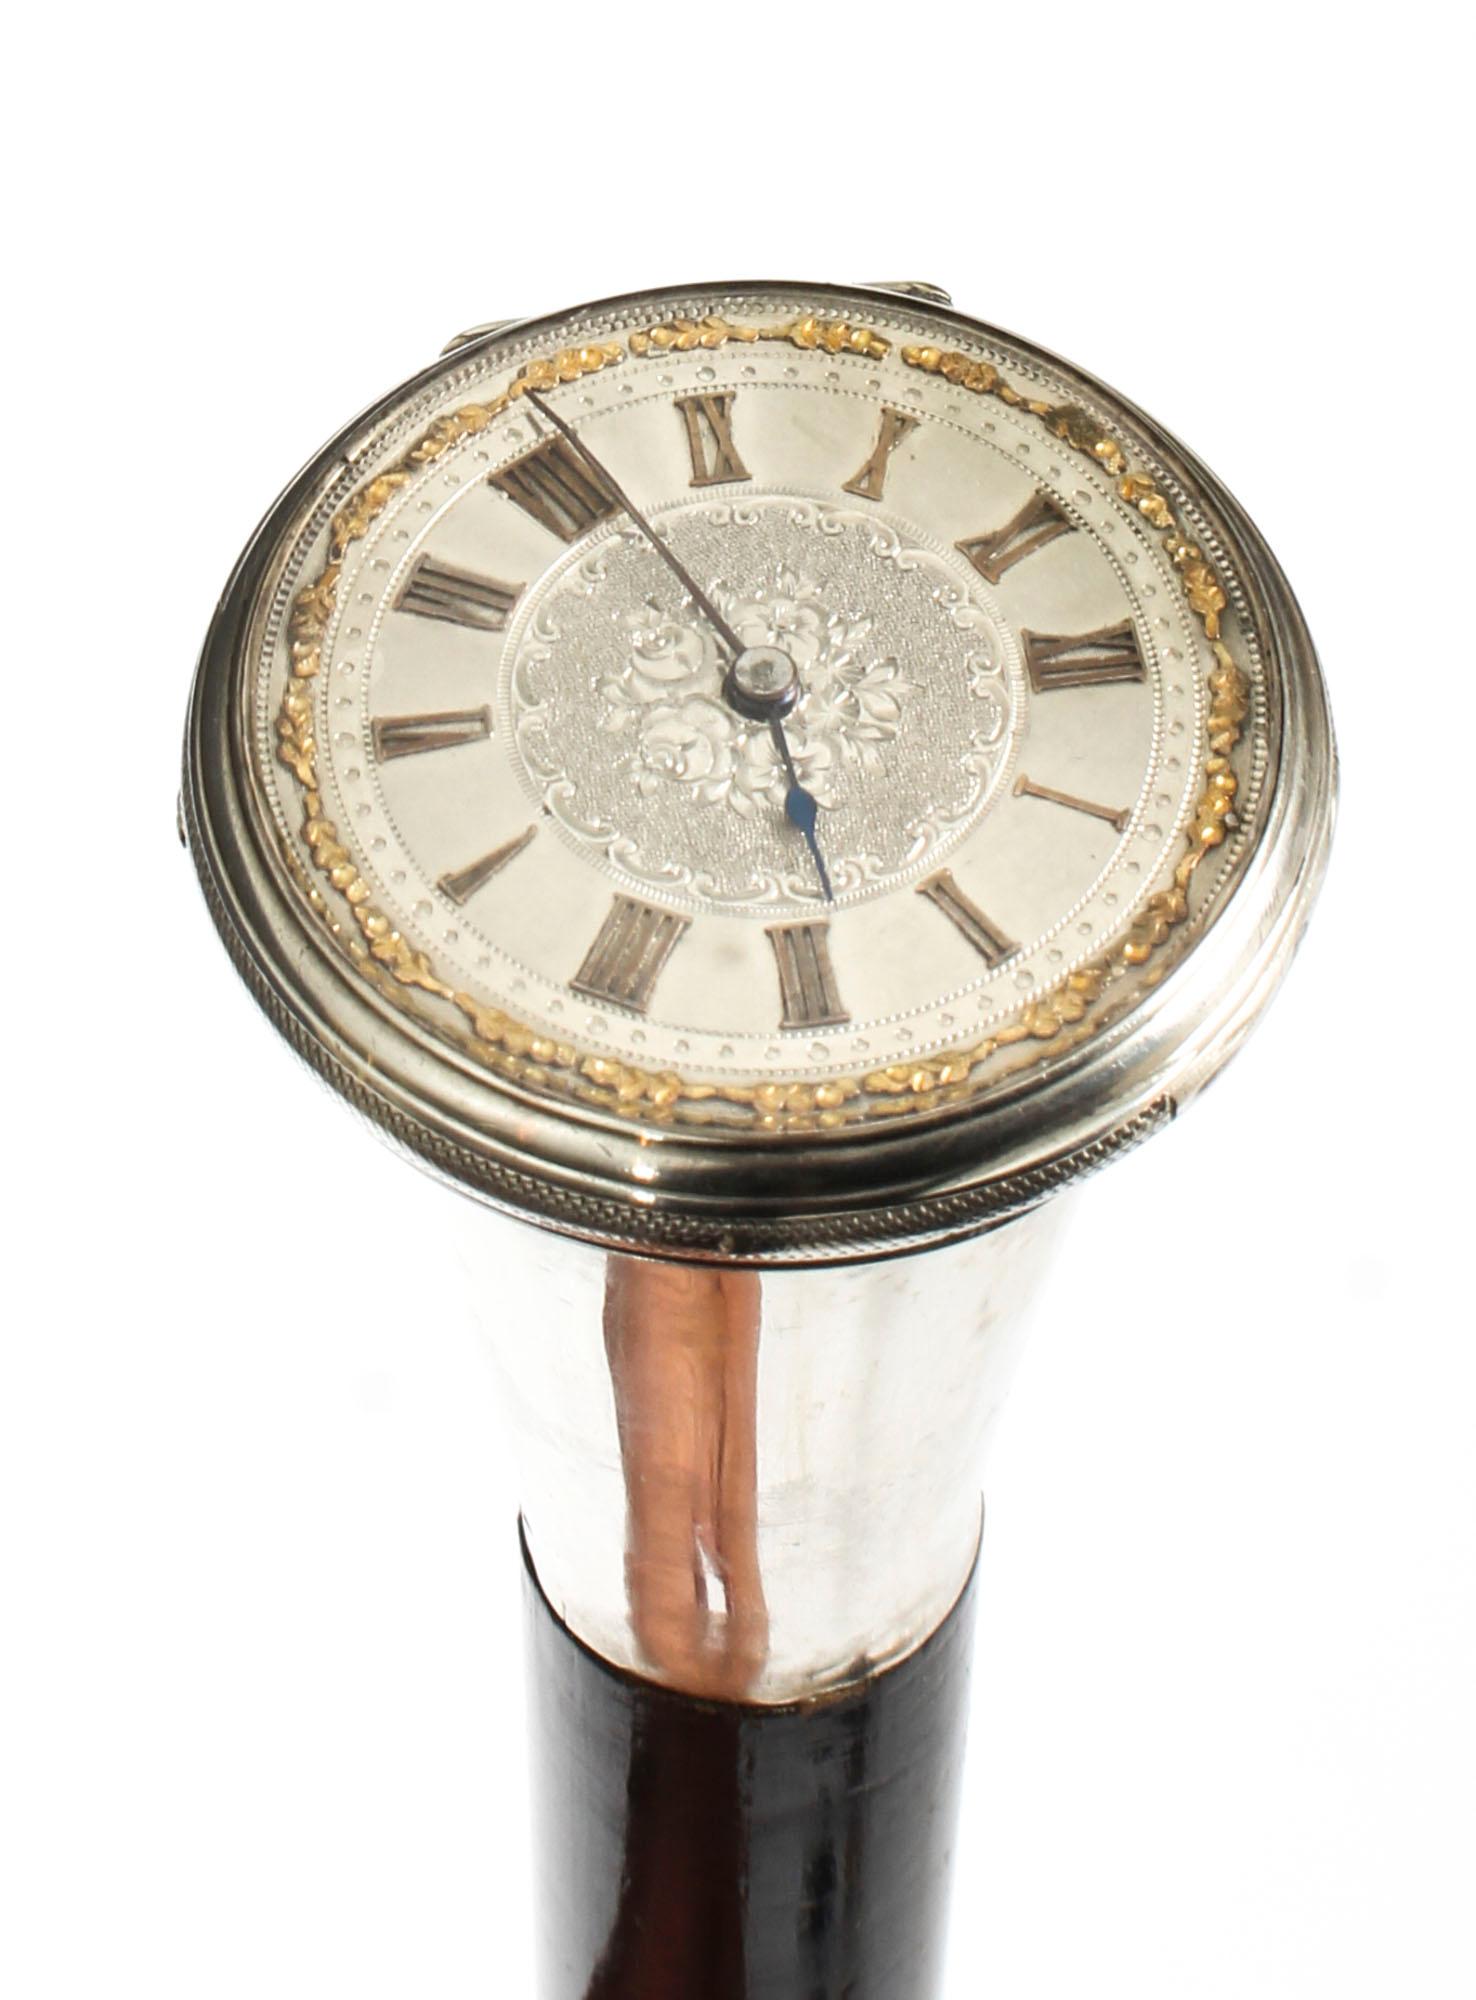 This is a beautiful and distinctive antique French Gentlemans ebonized walking stick watch with the exquisite silver watch fashioned into the handle, dating from circa 1880.

The watch having a decorative silvered dial and cylinder escapement. The